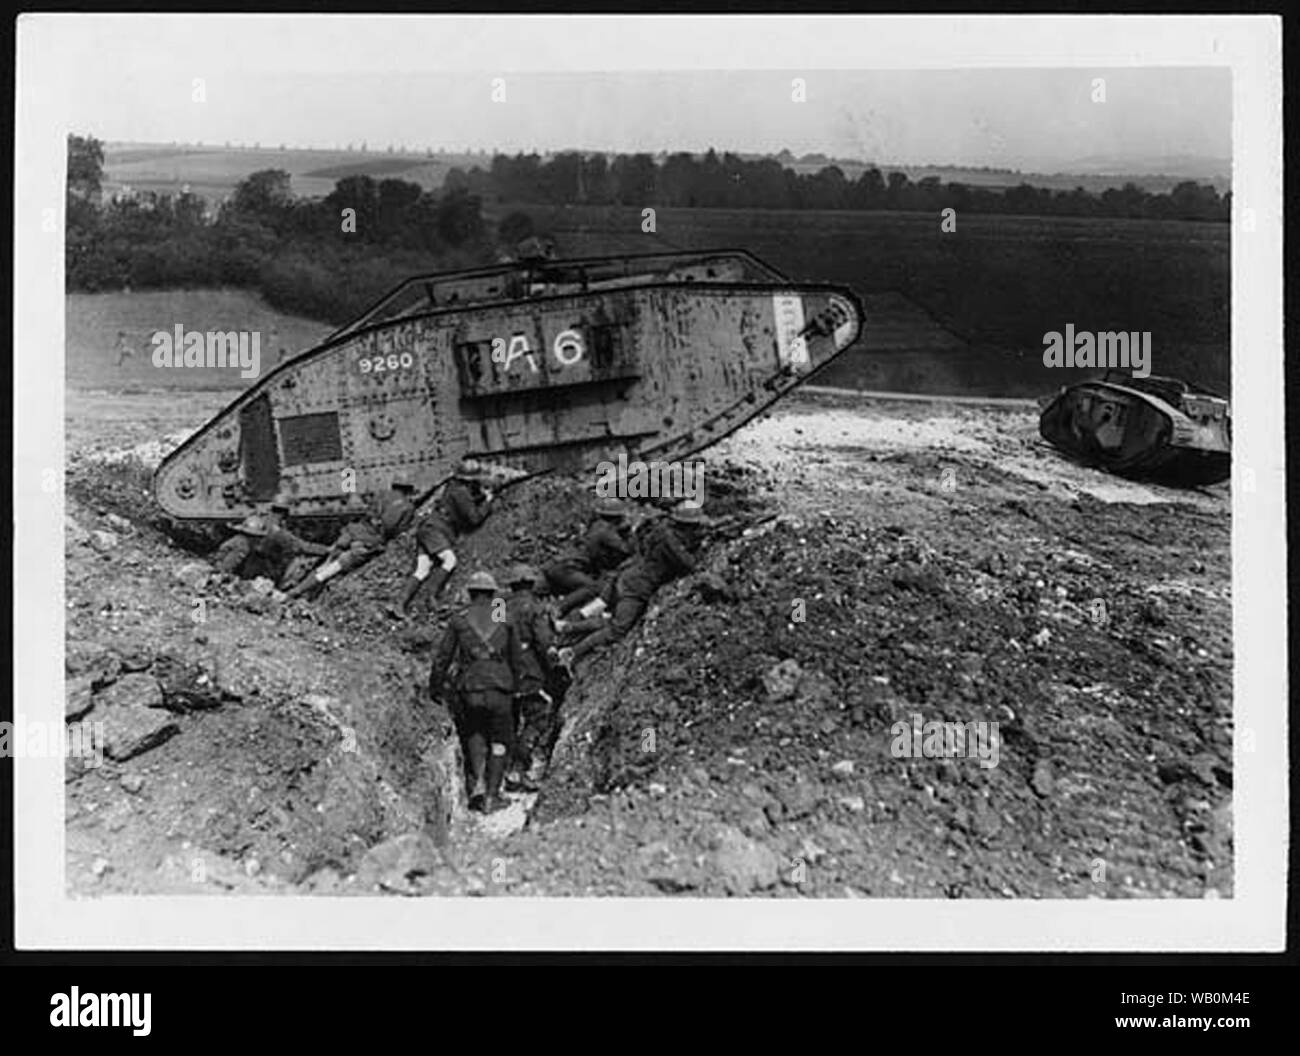 British tanks on training manoeuvres, in France, during World War I. This photograph of an advancing tank dwarfing British troops, gives an idea of the scale of tanks, and the power they brought to the front line in the last years of the war. The earliest models of tank were slow and excessively heavy, and struggled on wet ground, but later models were much more effective.  King George V is not pictured in this photograph, but is known to have visited the Western Front on several occasions. The King was a firm supporter of Haig and instigated his promotion to Field Marshal.  [Original reads: O Stock Photo